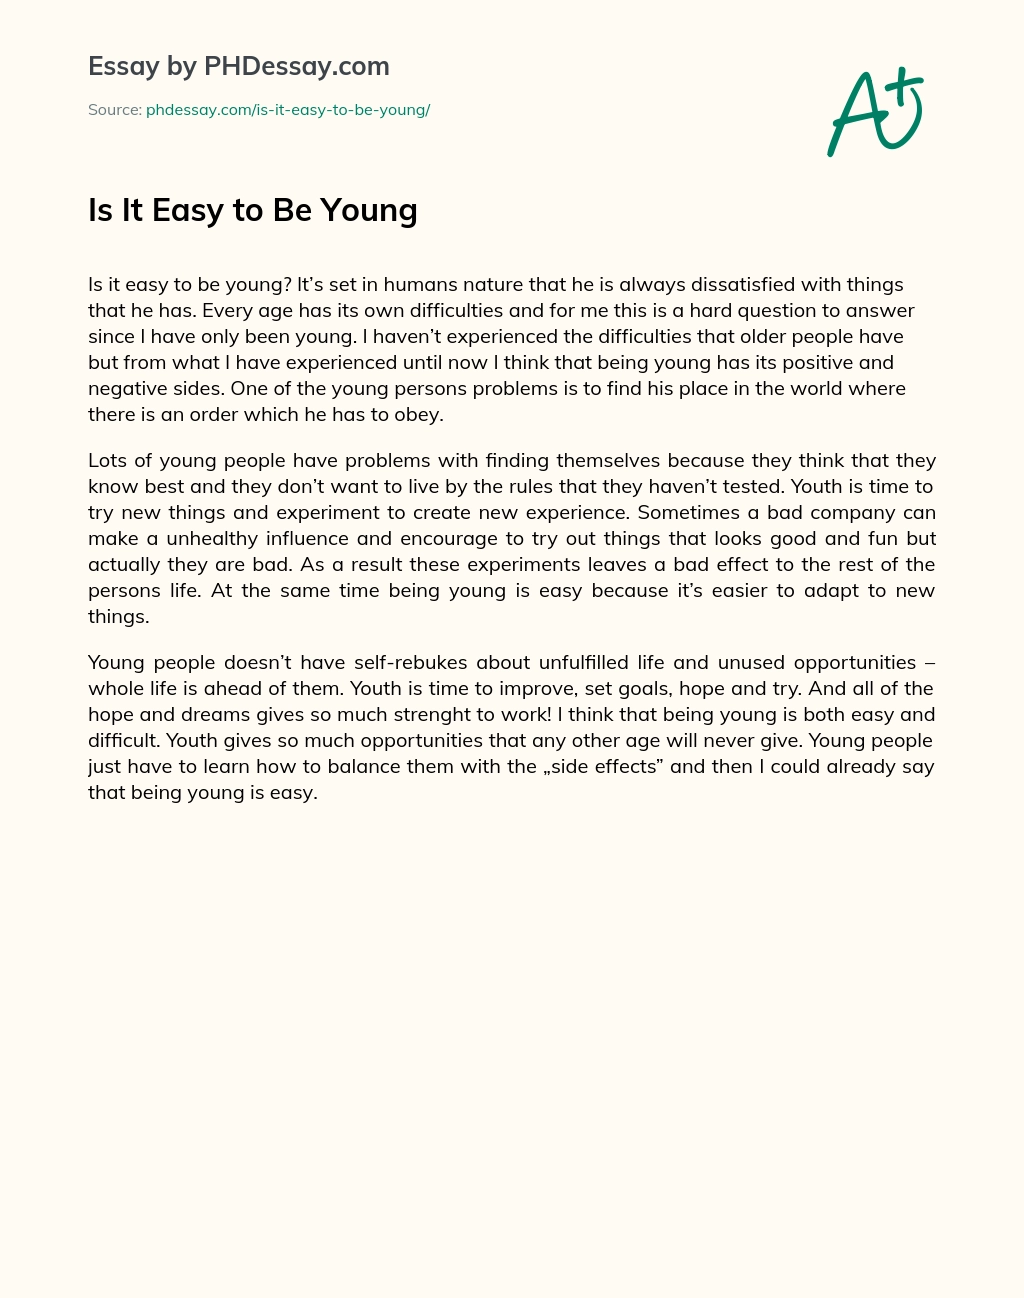 Is It Easy to Be Young essay